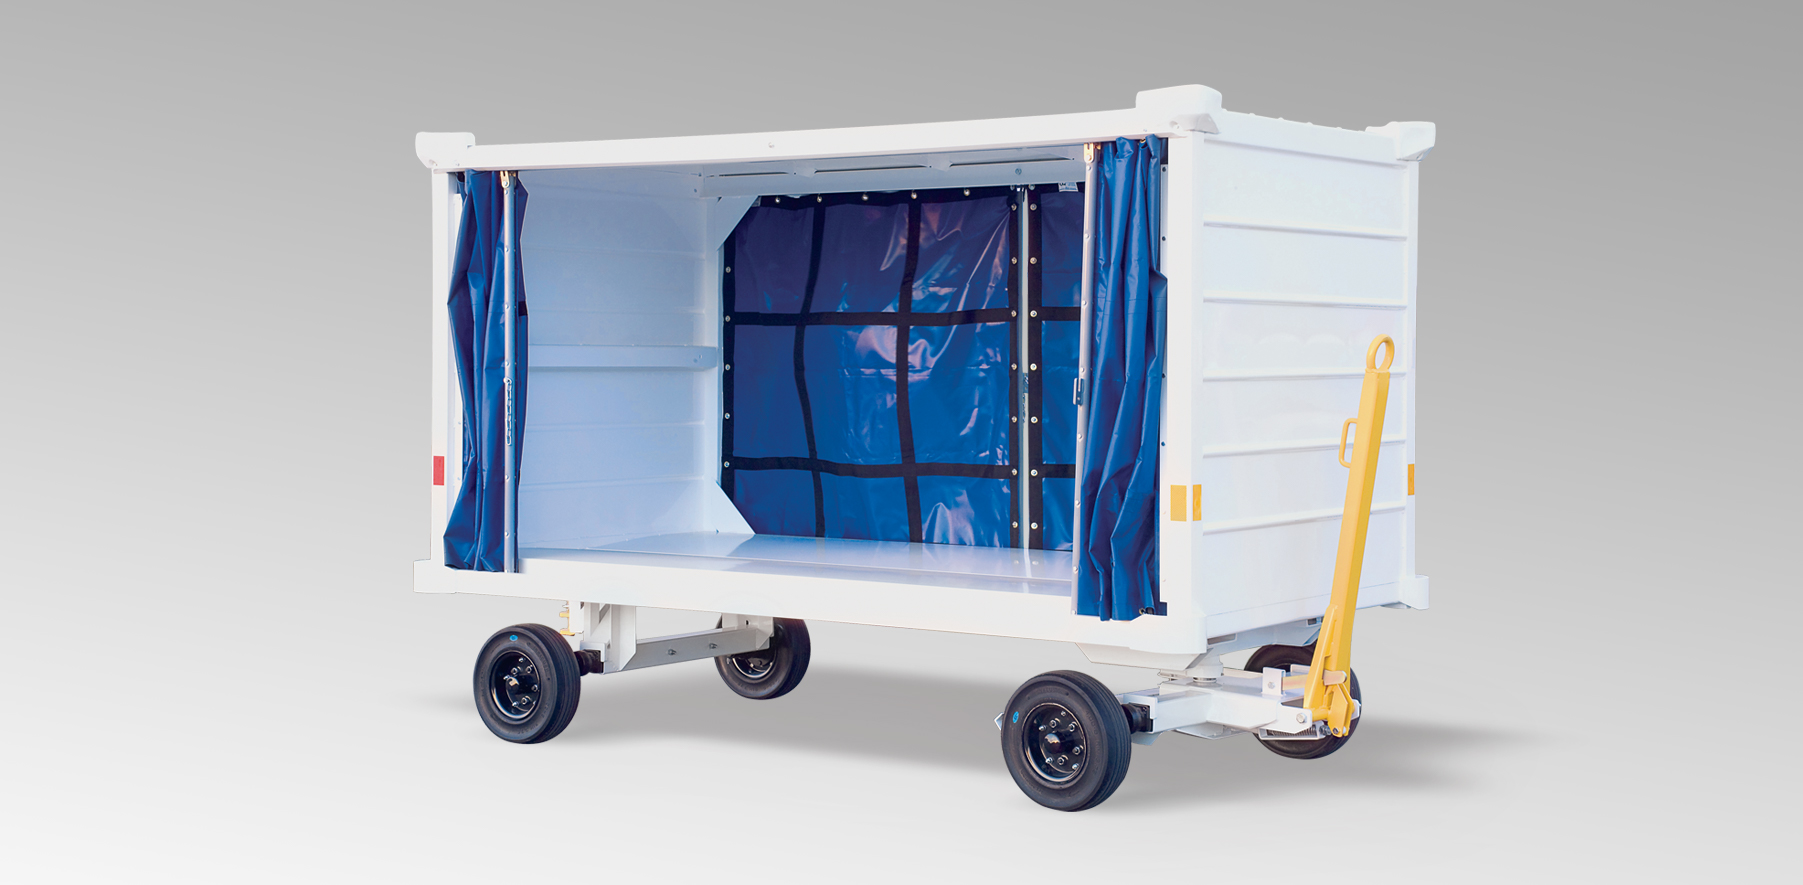 FAST A005414D Baggage Cart for Sale or Lease | Pinnacle Logistics